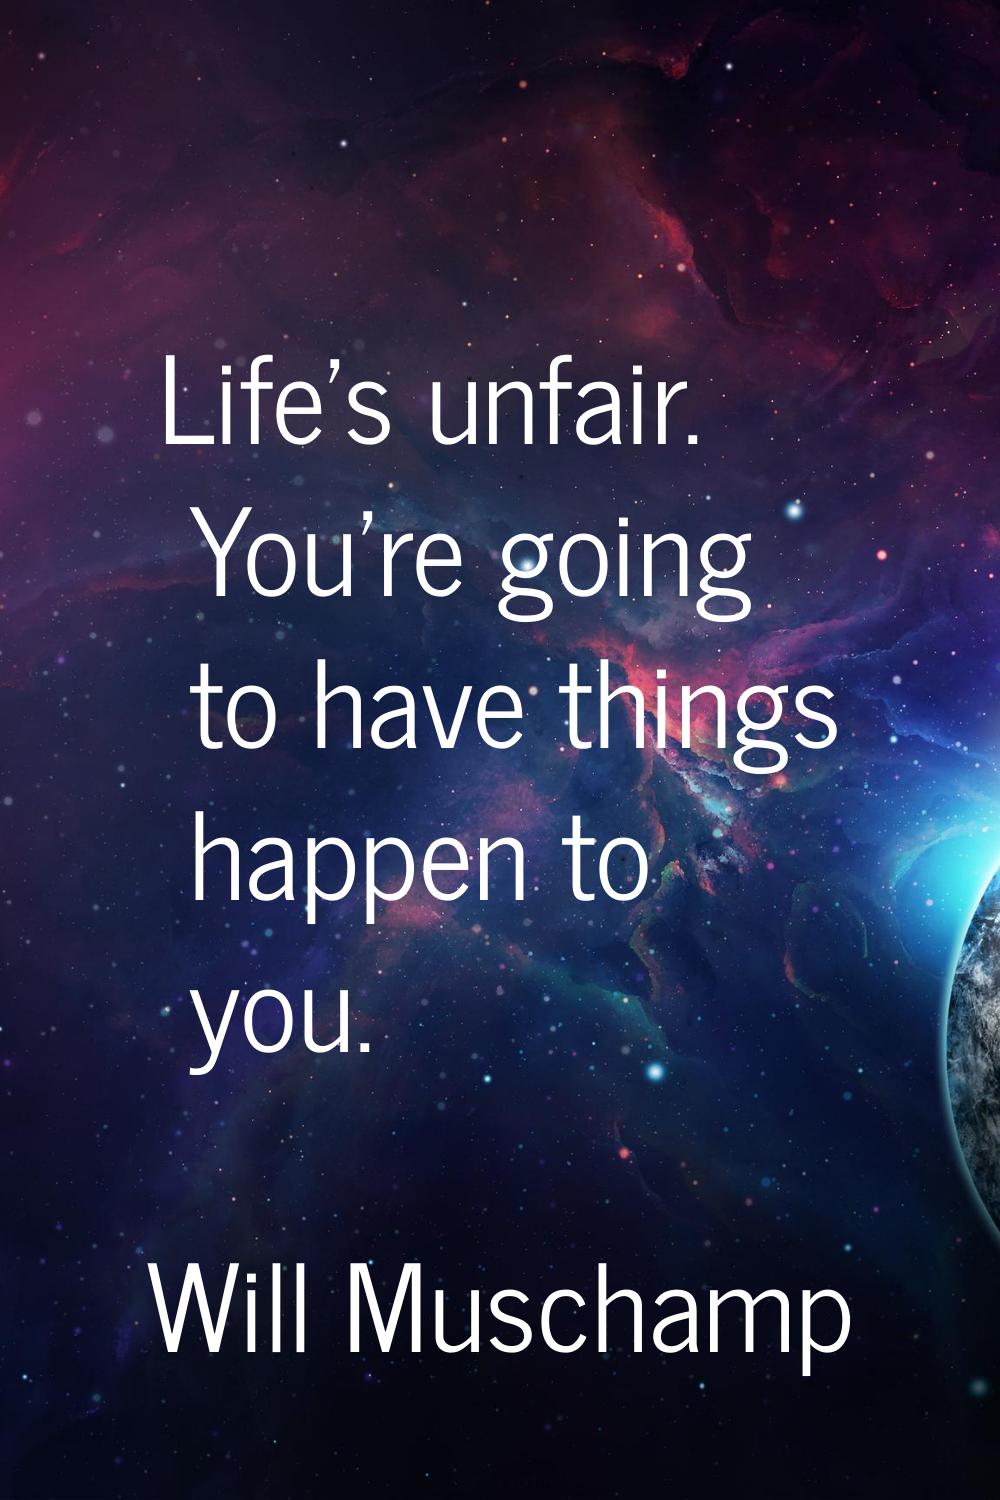 Life's unfair. You're going to have things happen to you.